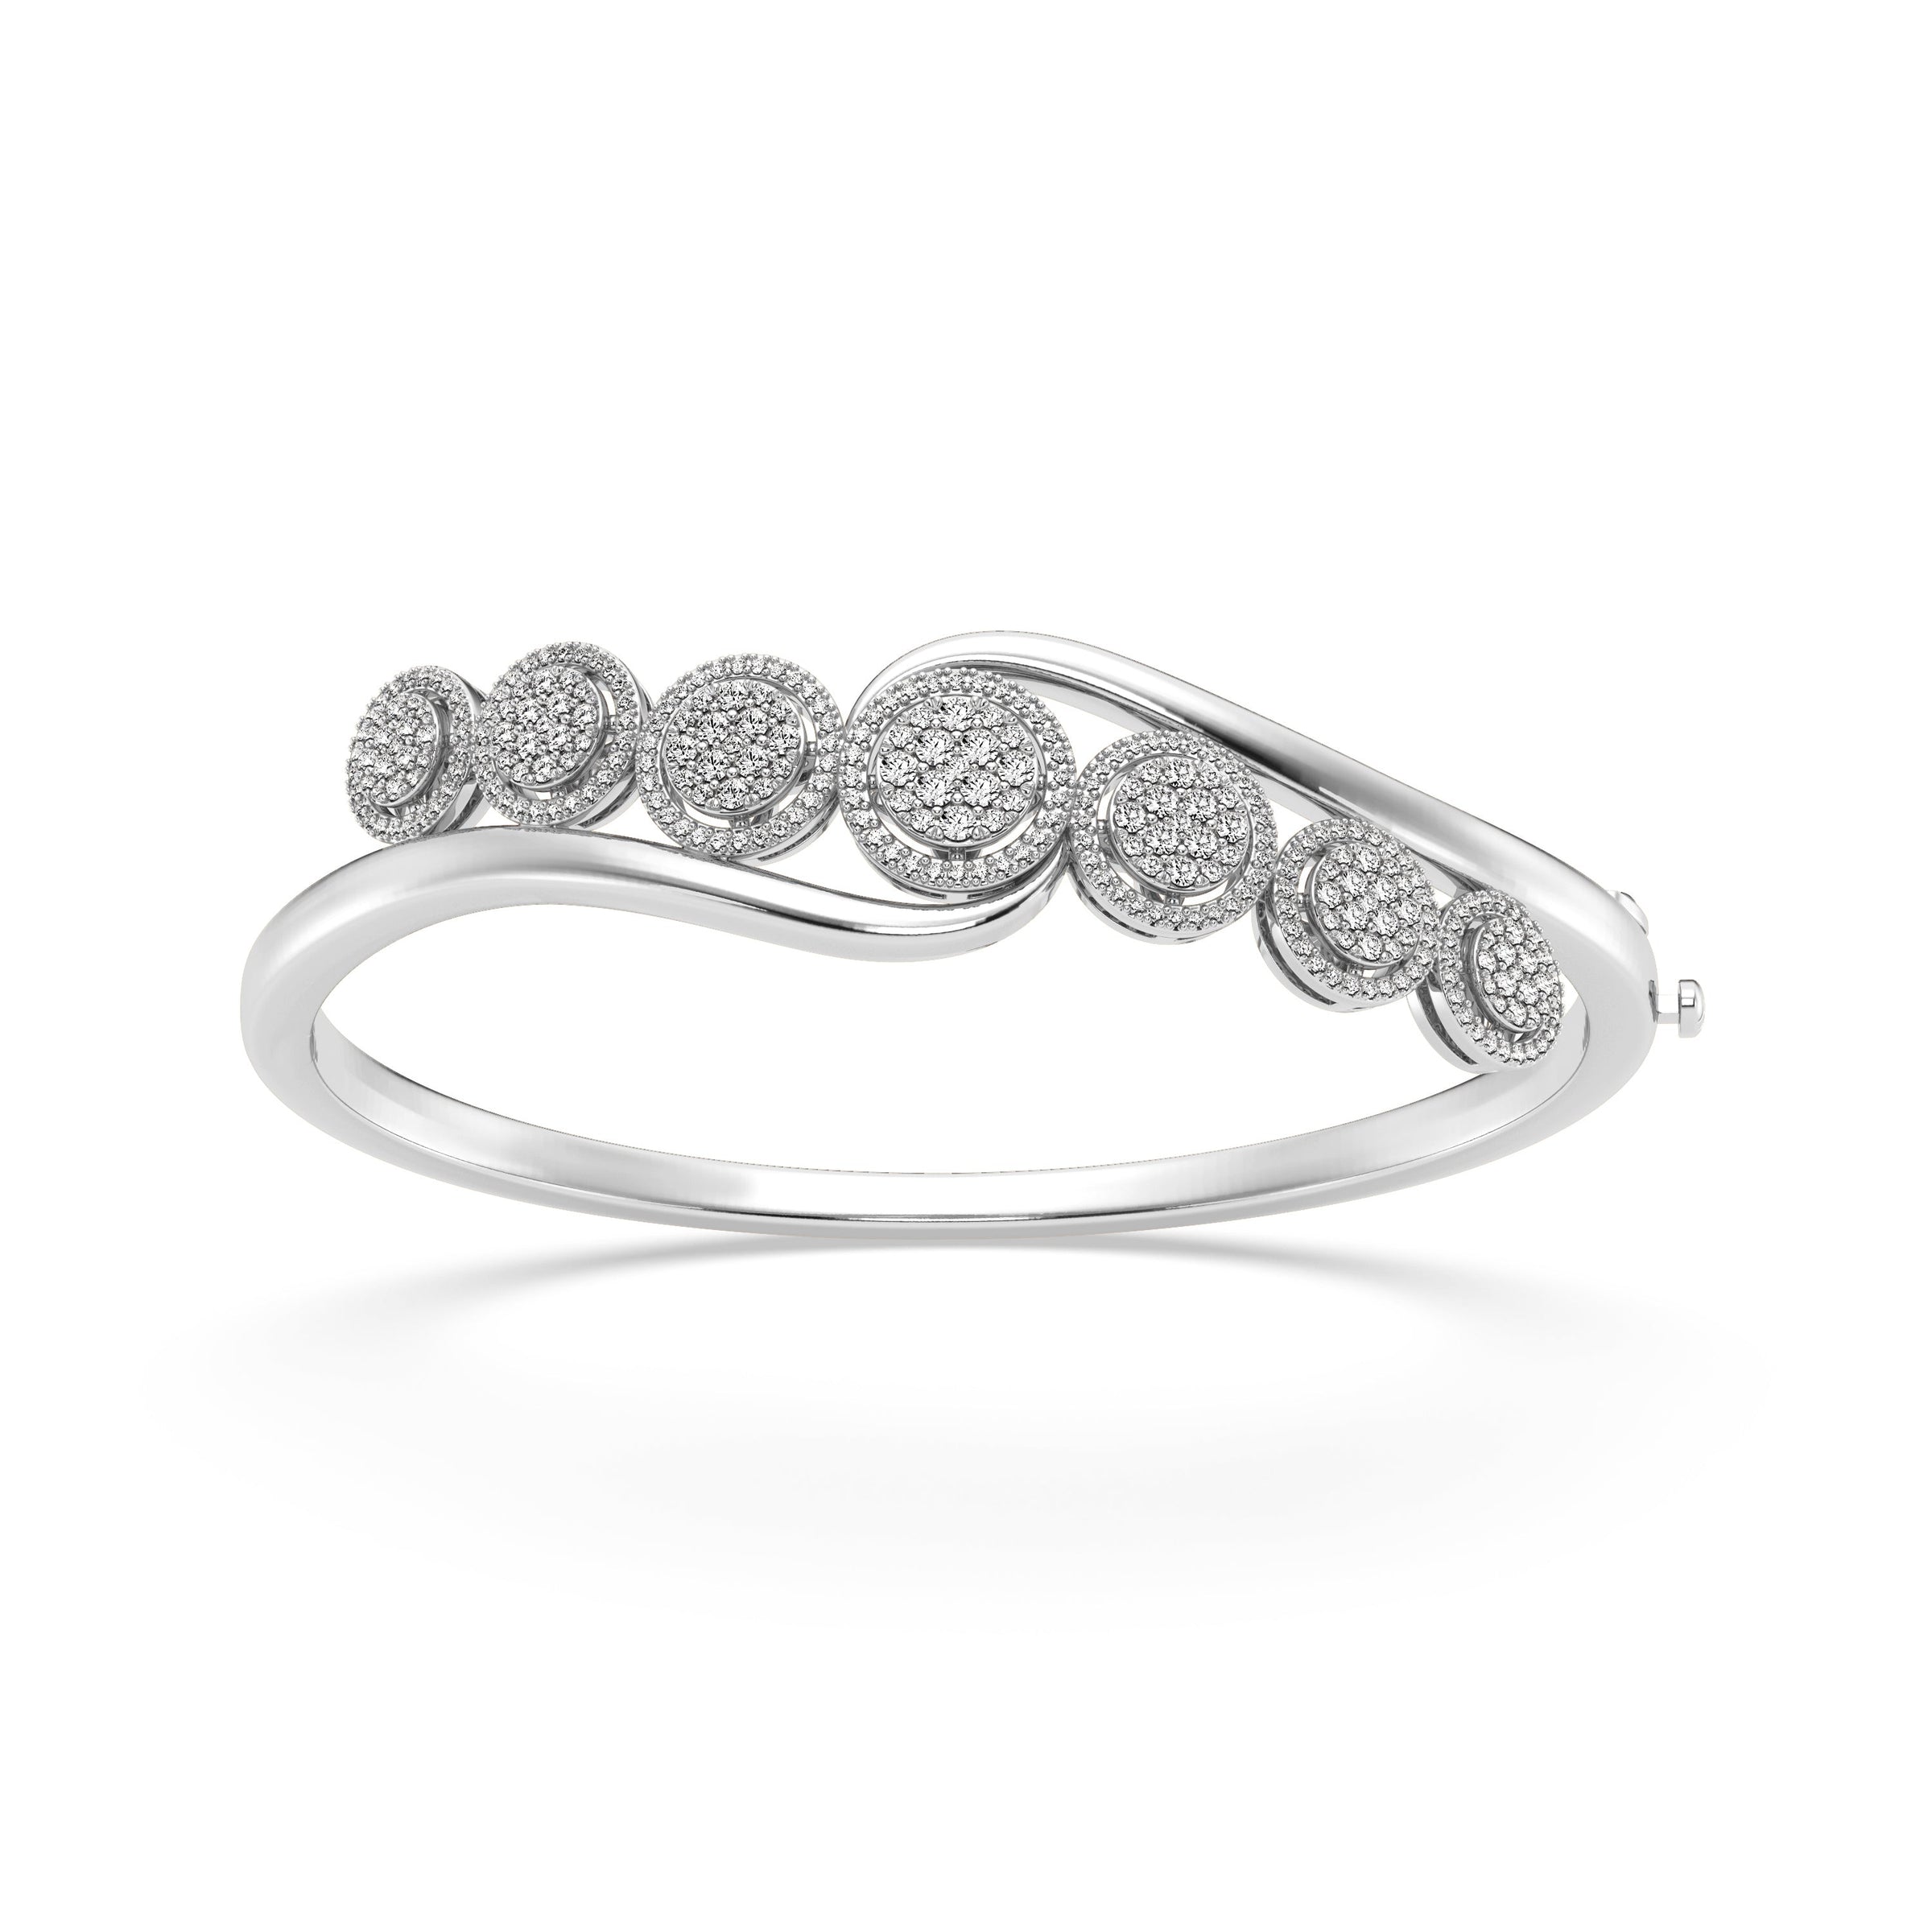 Mirage Halo Bangle with 1.50ct of Laboratory Grown Diamonds in Sterling Silver and Platinum Bangles Bevilles 